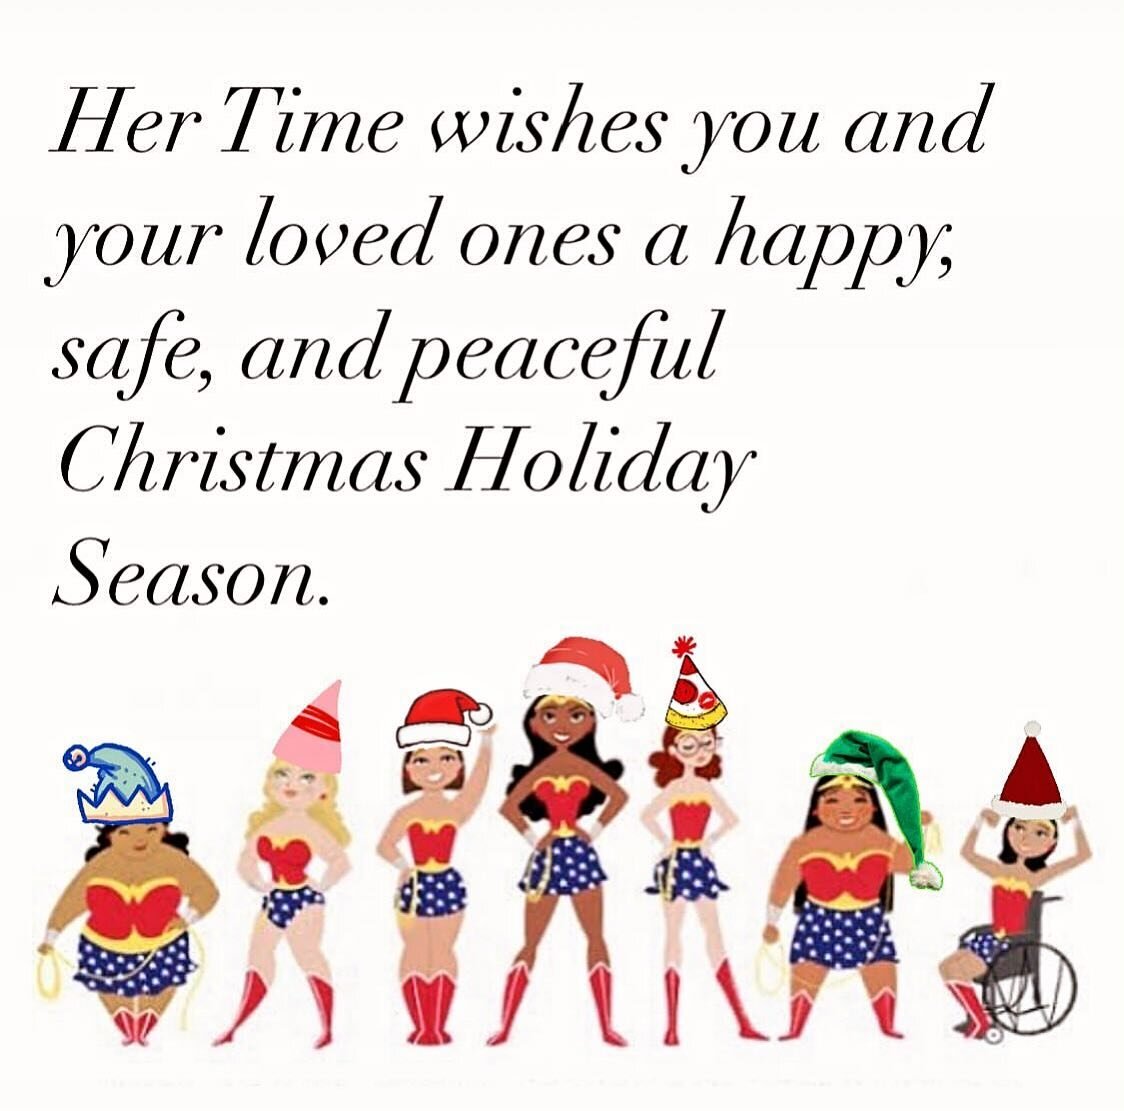 Her Time would like to wish you a safe and peaceful Christmas/holiday season. 

Her Time will be closed from the 23rd December and reopen on the 10th January. If you phone, text or email during this period, I will get back to you on our return. 

For